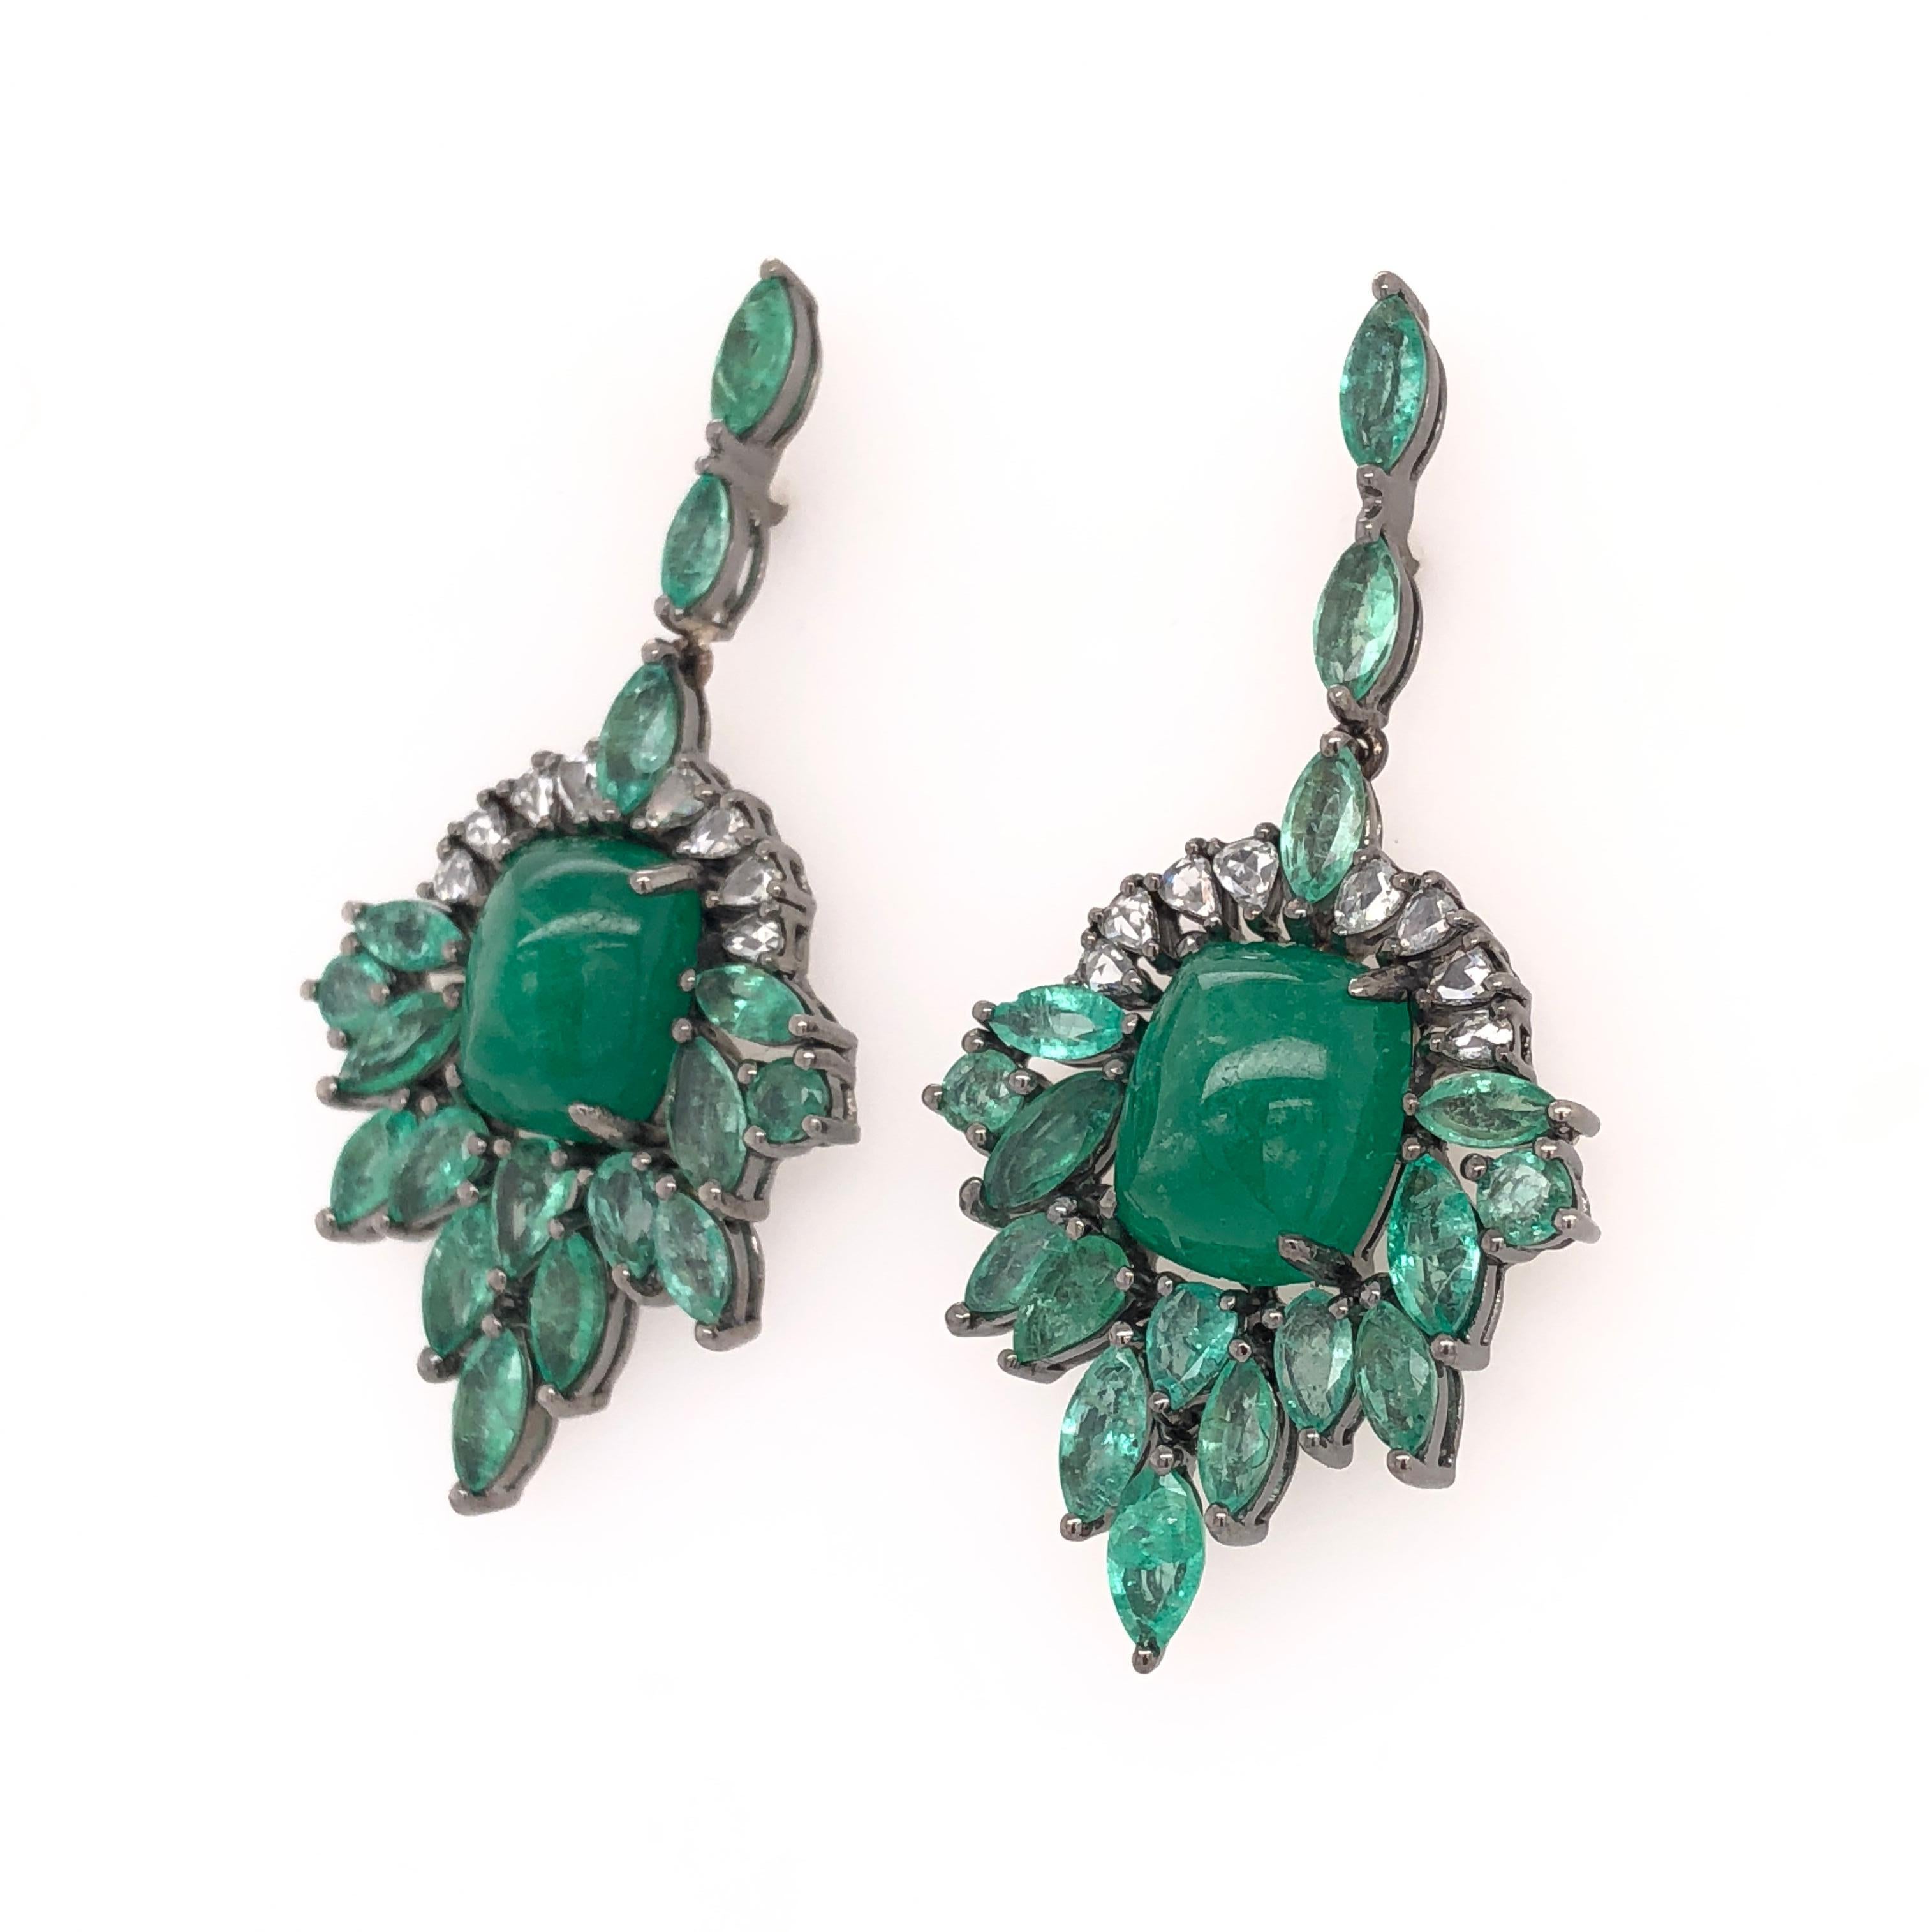 Green Lagoon Collection 

Chandelier earrings with a center Cabochon Emerald surrounded by light marquise Emeralds and rose cut pear shape diamonds set in 18K black rhodium gold. 

Emerald: 13.62ct total weight.
Diamonds: 0.54ct total weight.
All